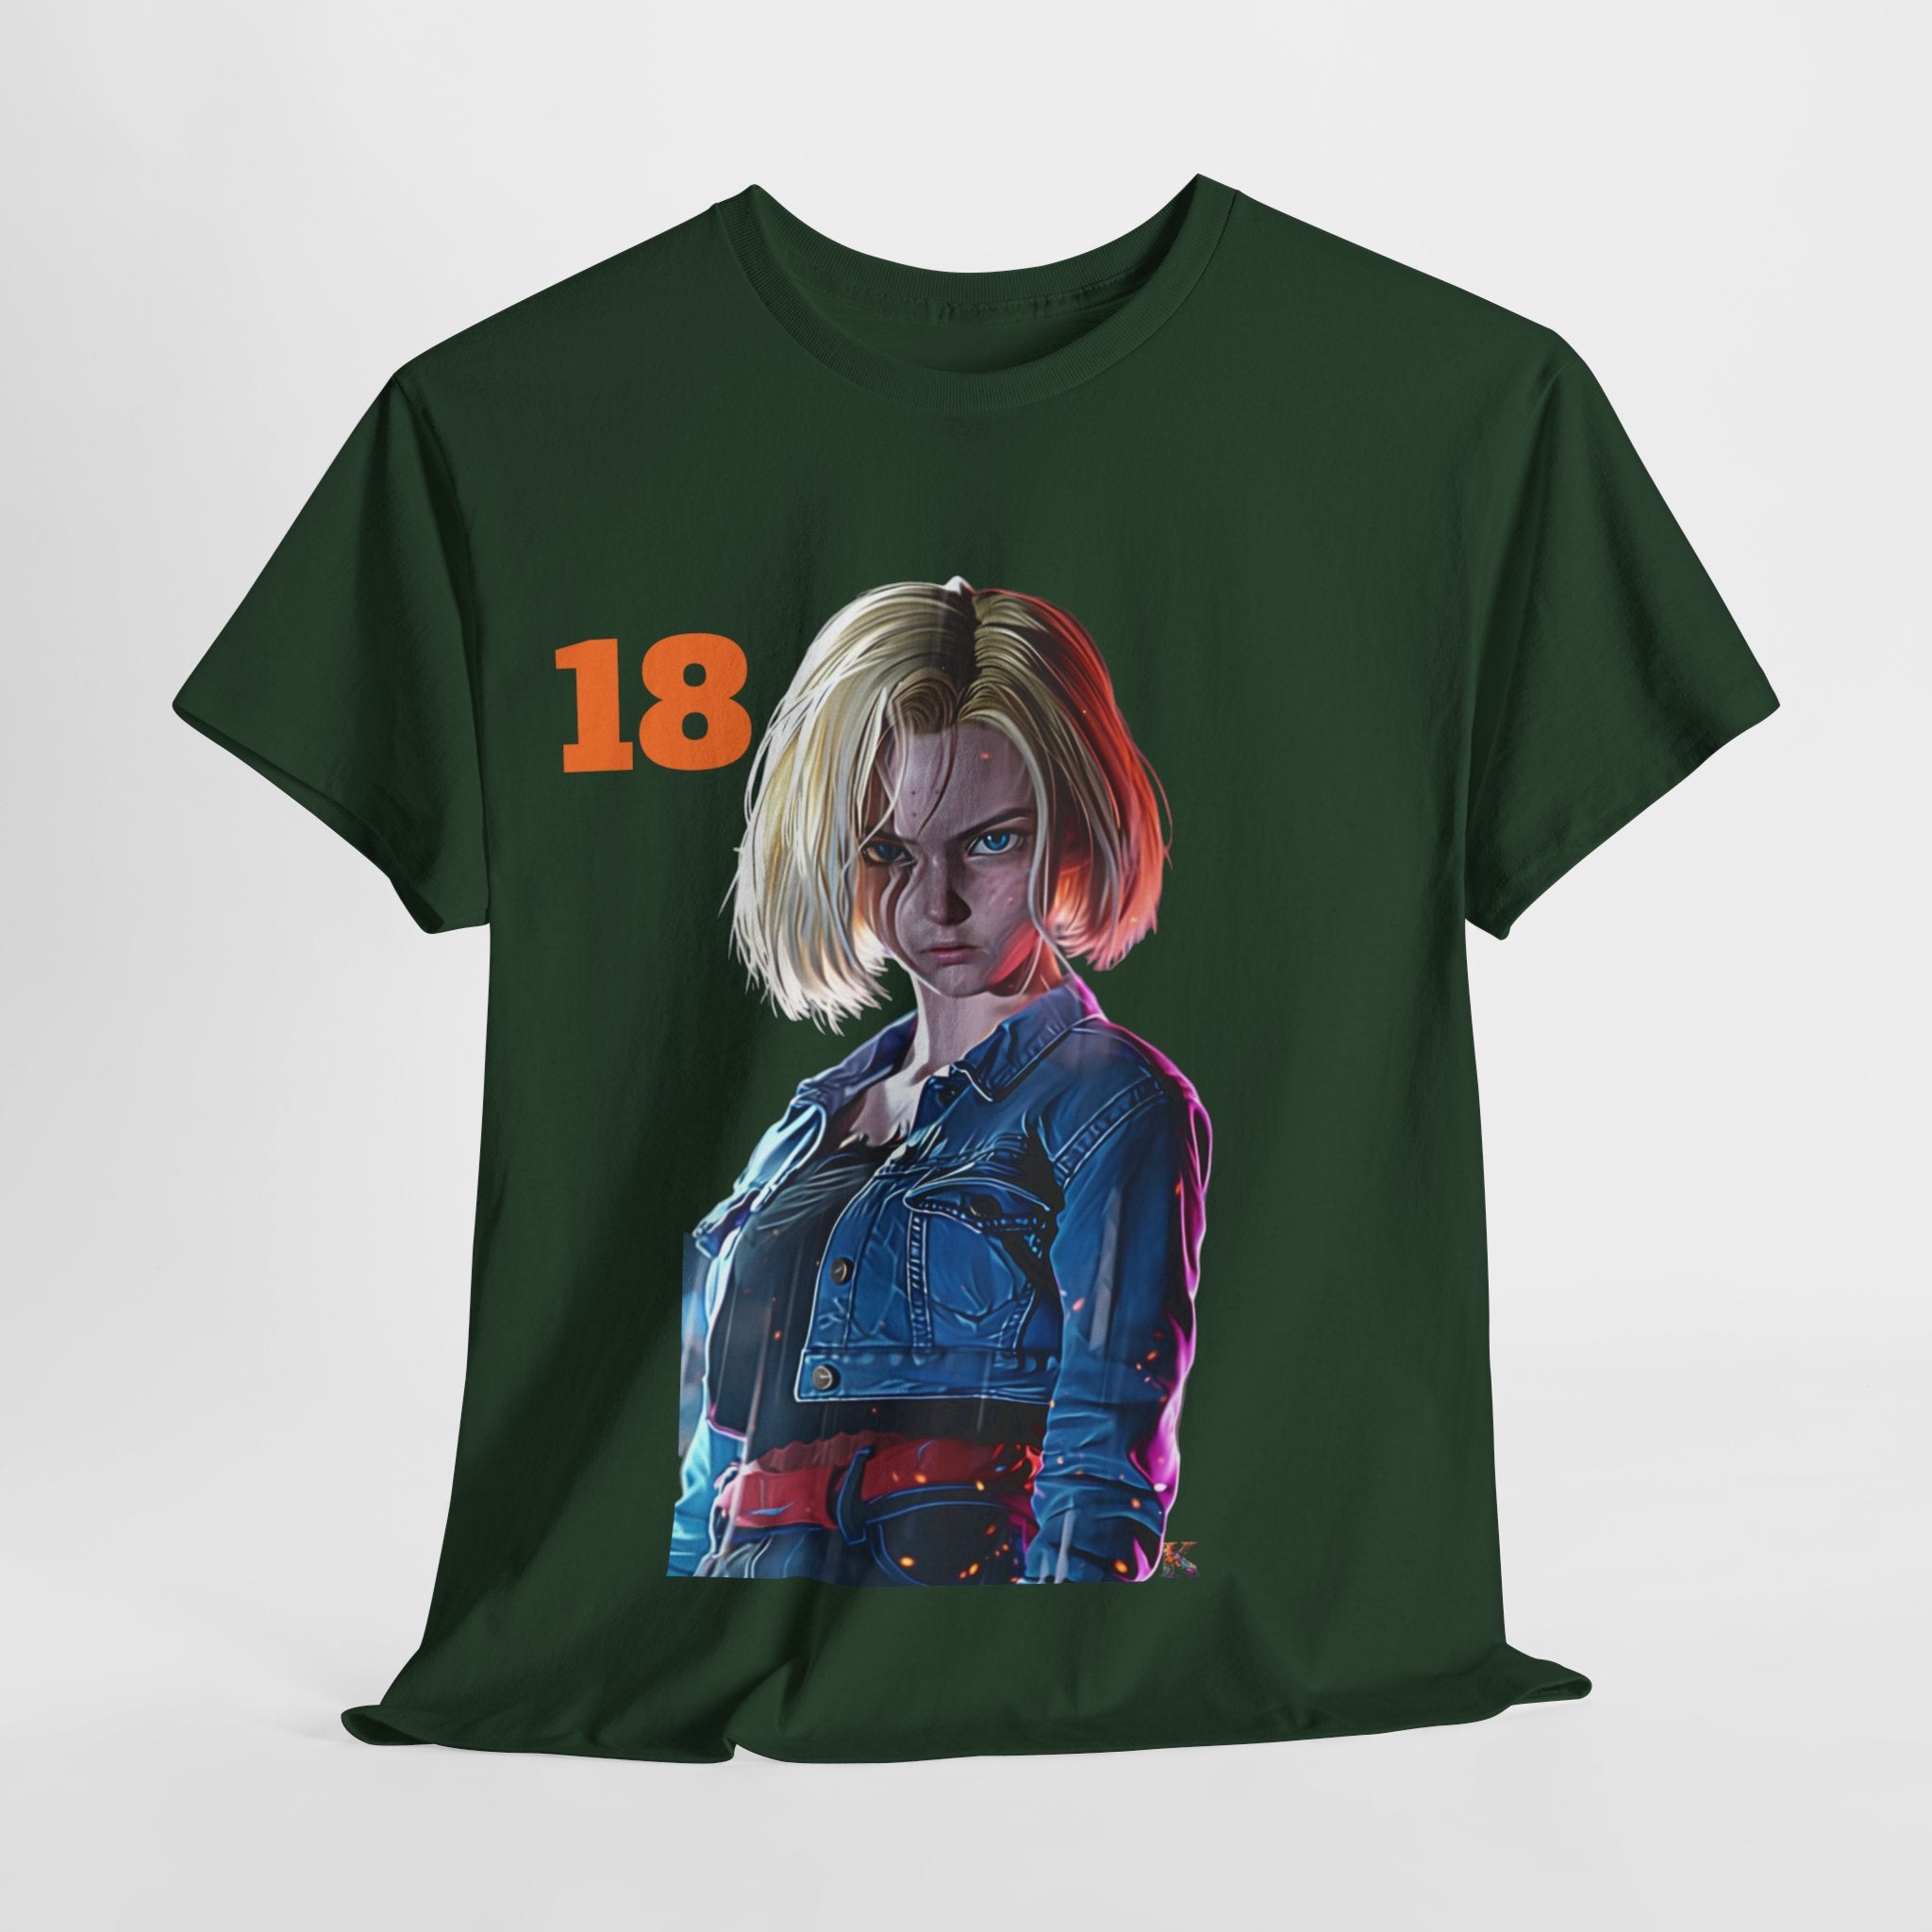 Cyber Chic: An-droid 18 Inspired Unisex Heavy Cotton Tee - Retro Futurism Meets Modern Style